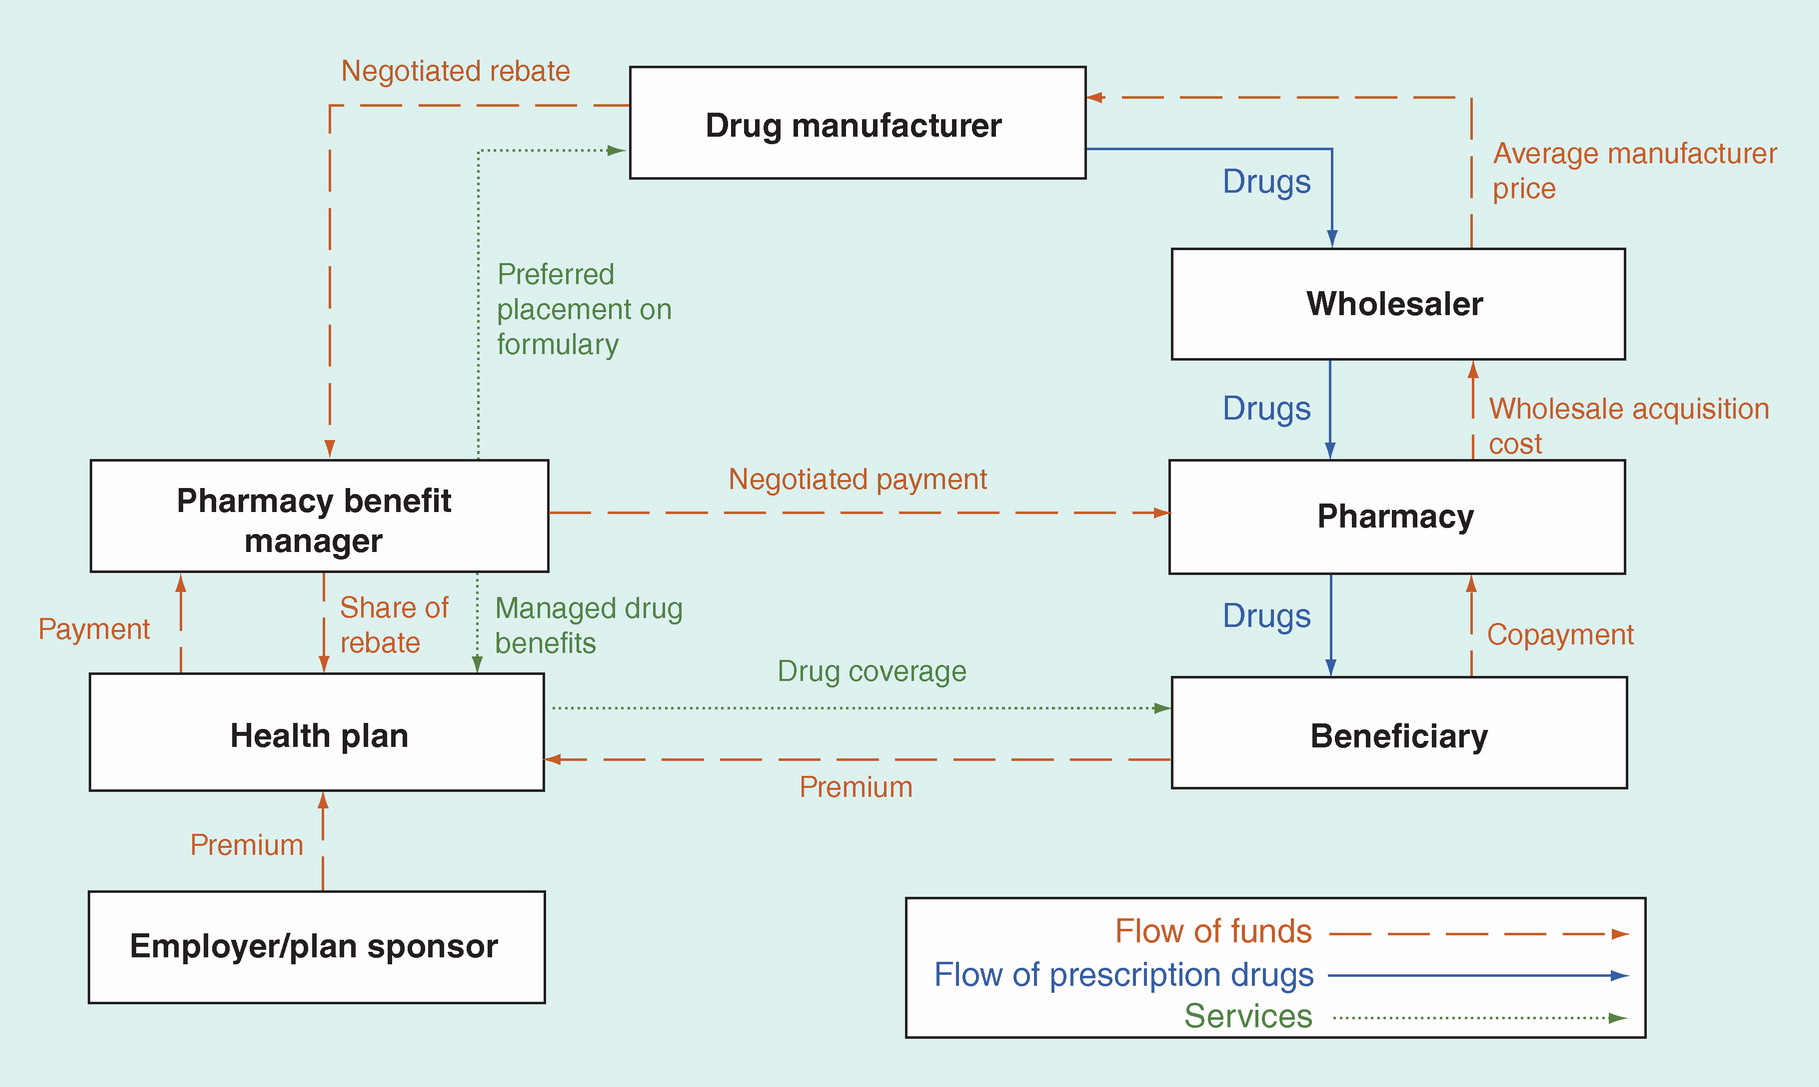 policy-perspectives-on-alternative-models-for-pharmaceutical-rebates-a